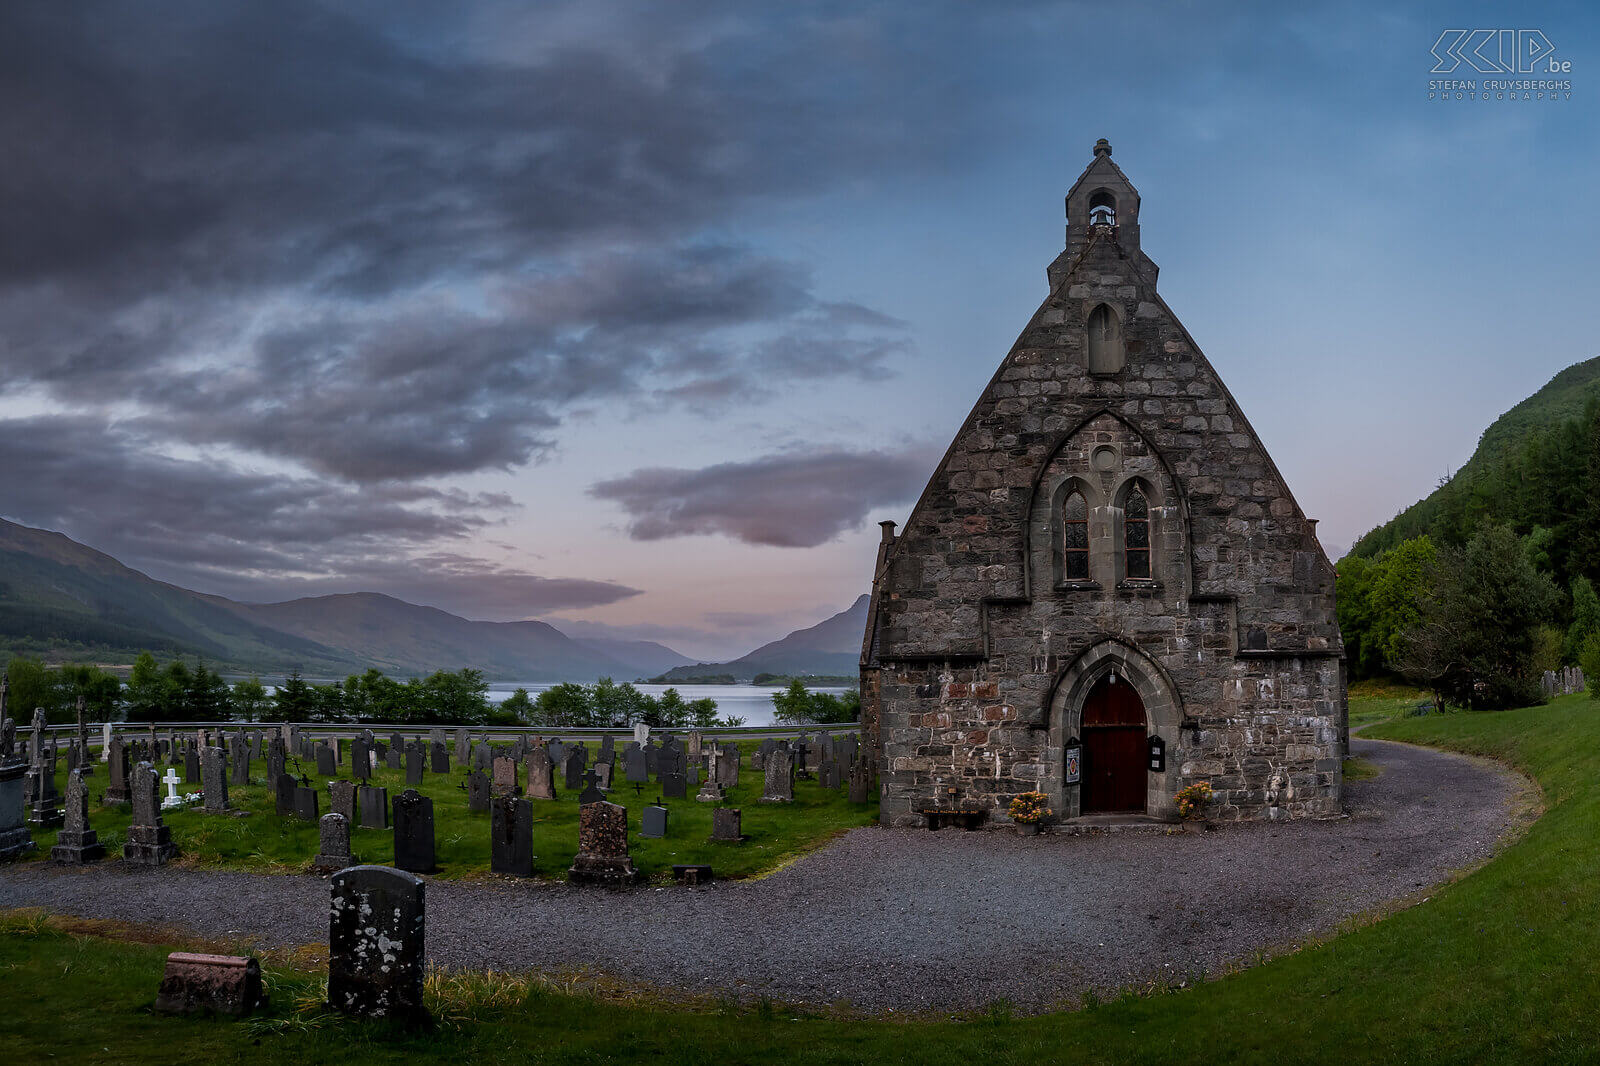 Ballachulish - St Johns Church St Johns Church was built in 1842 and is located near Loch Leven in the small village of Ballachulish Stefan Cruysberghs